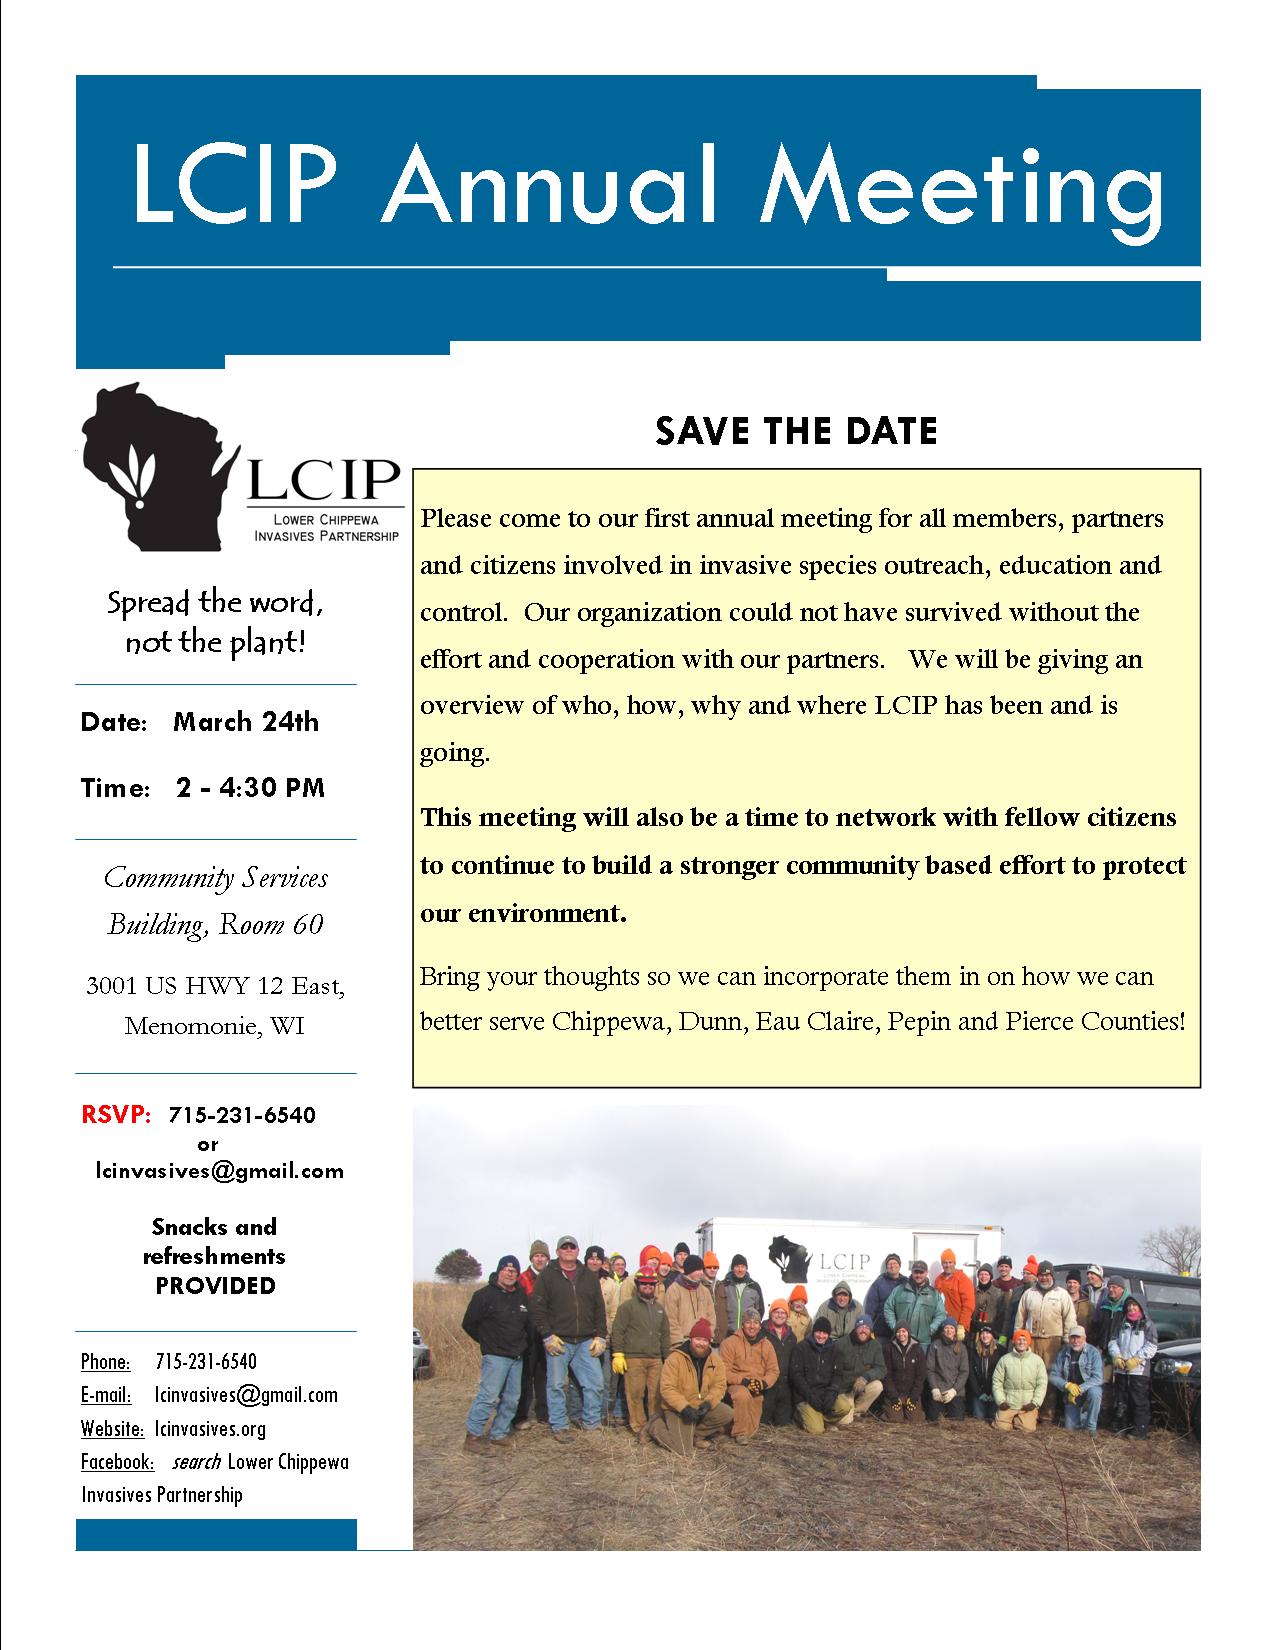 2016 Annual Meeting Flyer